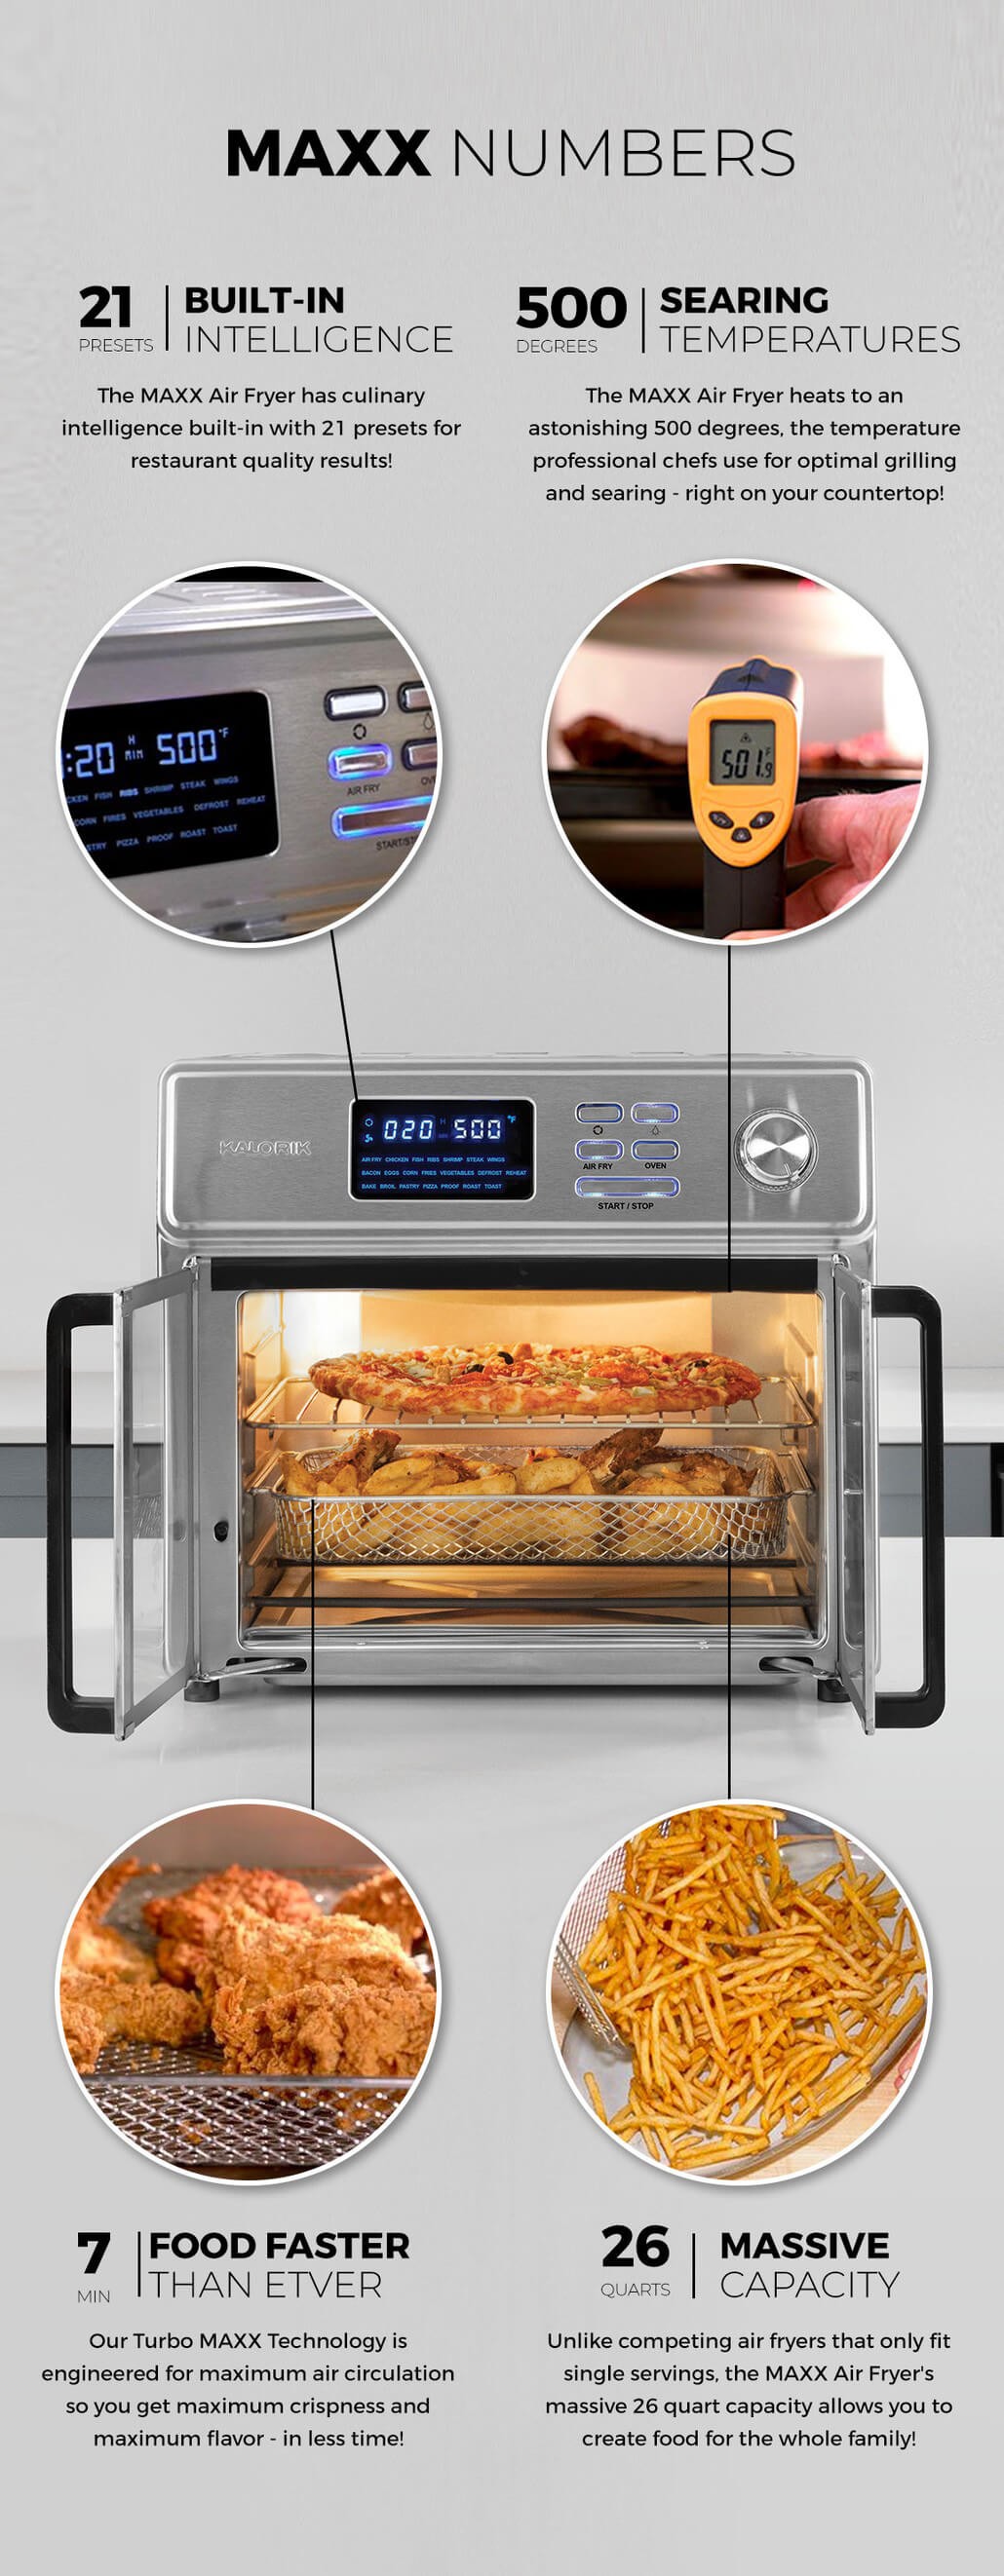 BUILT-IN INTELLIGENCE The MAXX, Air Fryer has culinary intelligence built-in with 21 presets for restaurant quality results, SEARING TEMPERATURES, The MAXX Air Fryer heats to an astonishing 500 degrees, the temperature professional chefs use for optimal grilling and searing - right on your countertop, FOOD FASTER THAN EVER, Our Turbo MAXX Technology is engineered for maximum air circulation so you get maximum crispness and maximum flavor - in less time, MASSIVE CAPACITY, Unlike competing air fryers that only fit single servings, the MAXX Air Fryer's massive 26 quart capacity allows you to create food for the whole family!